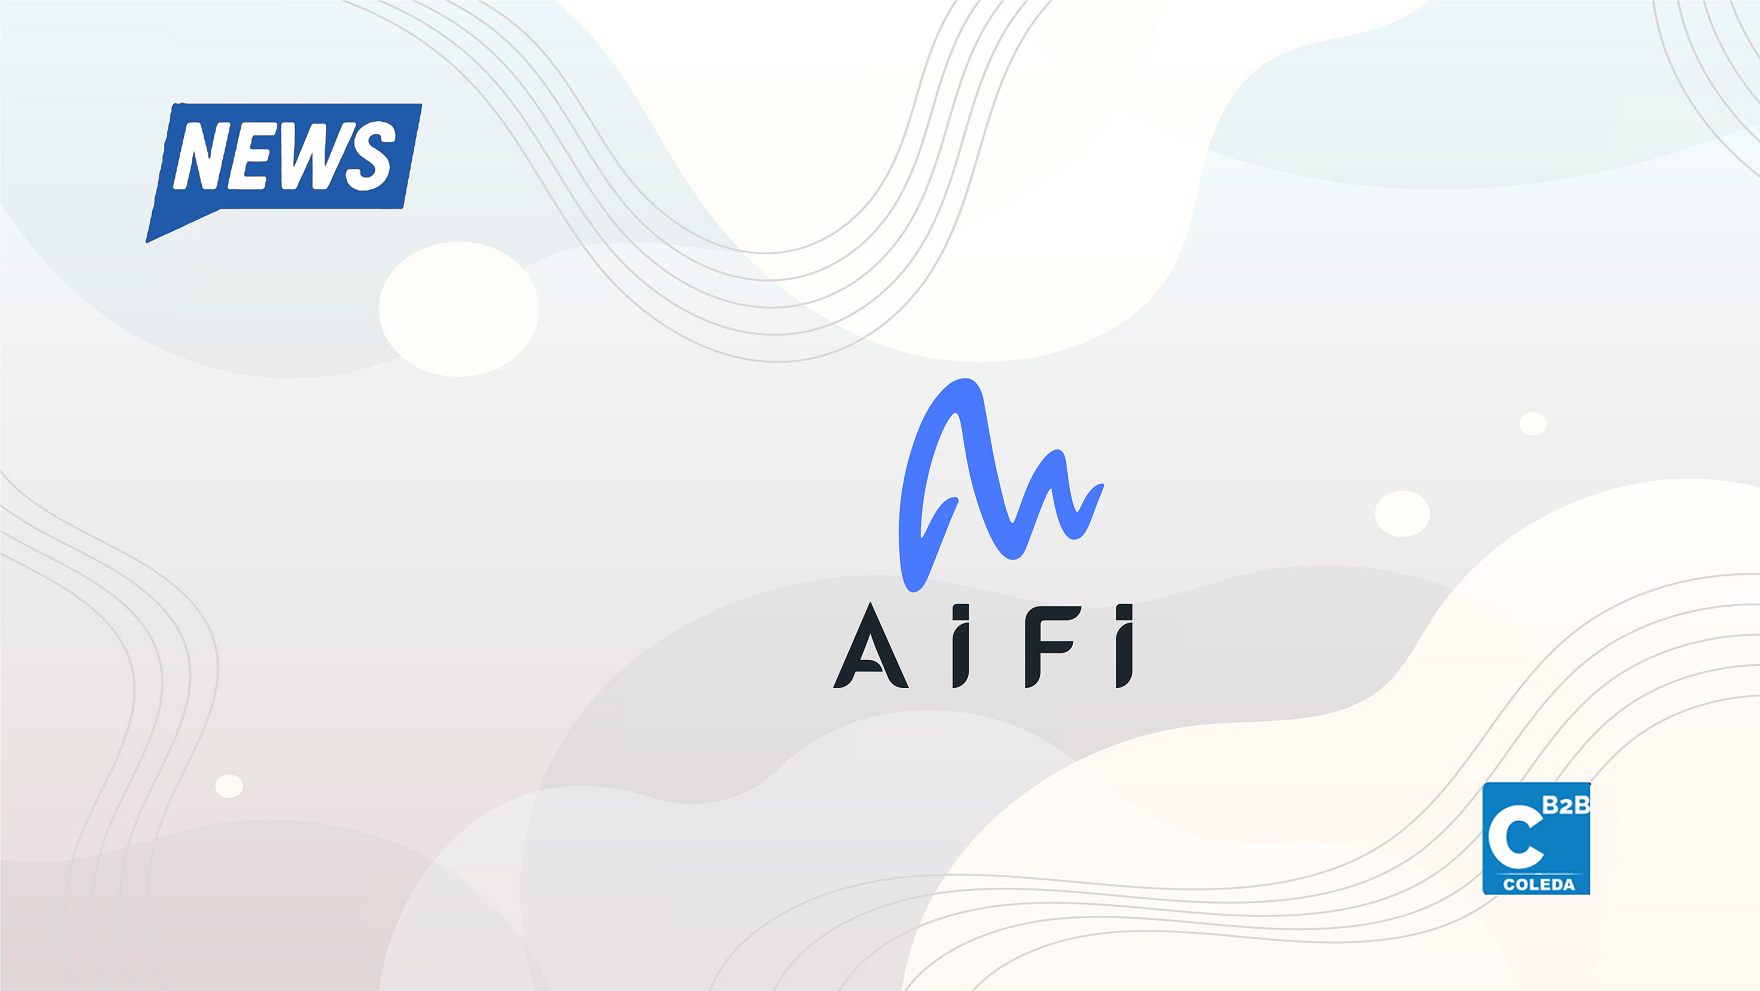 AiFi gets an opportunity to expand its autonomous retail shopping solutions through Phoenix Raceway